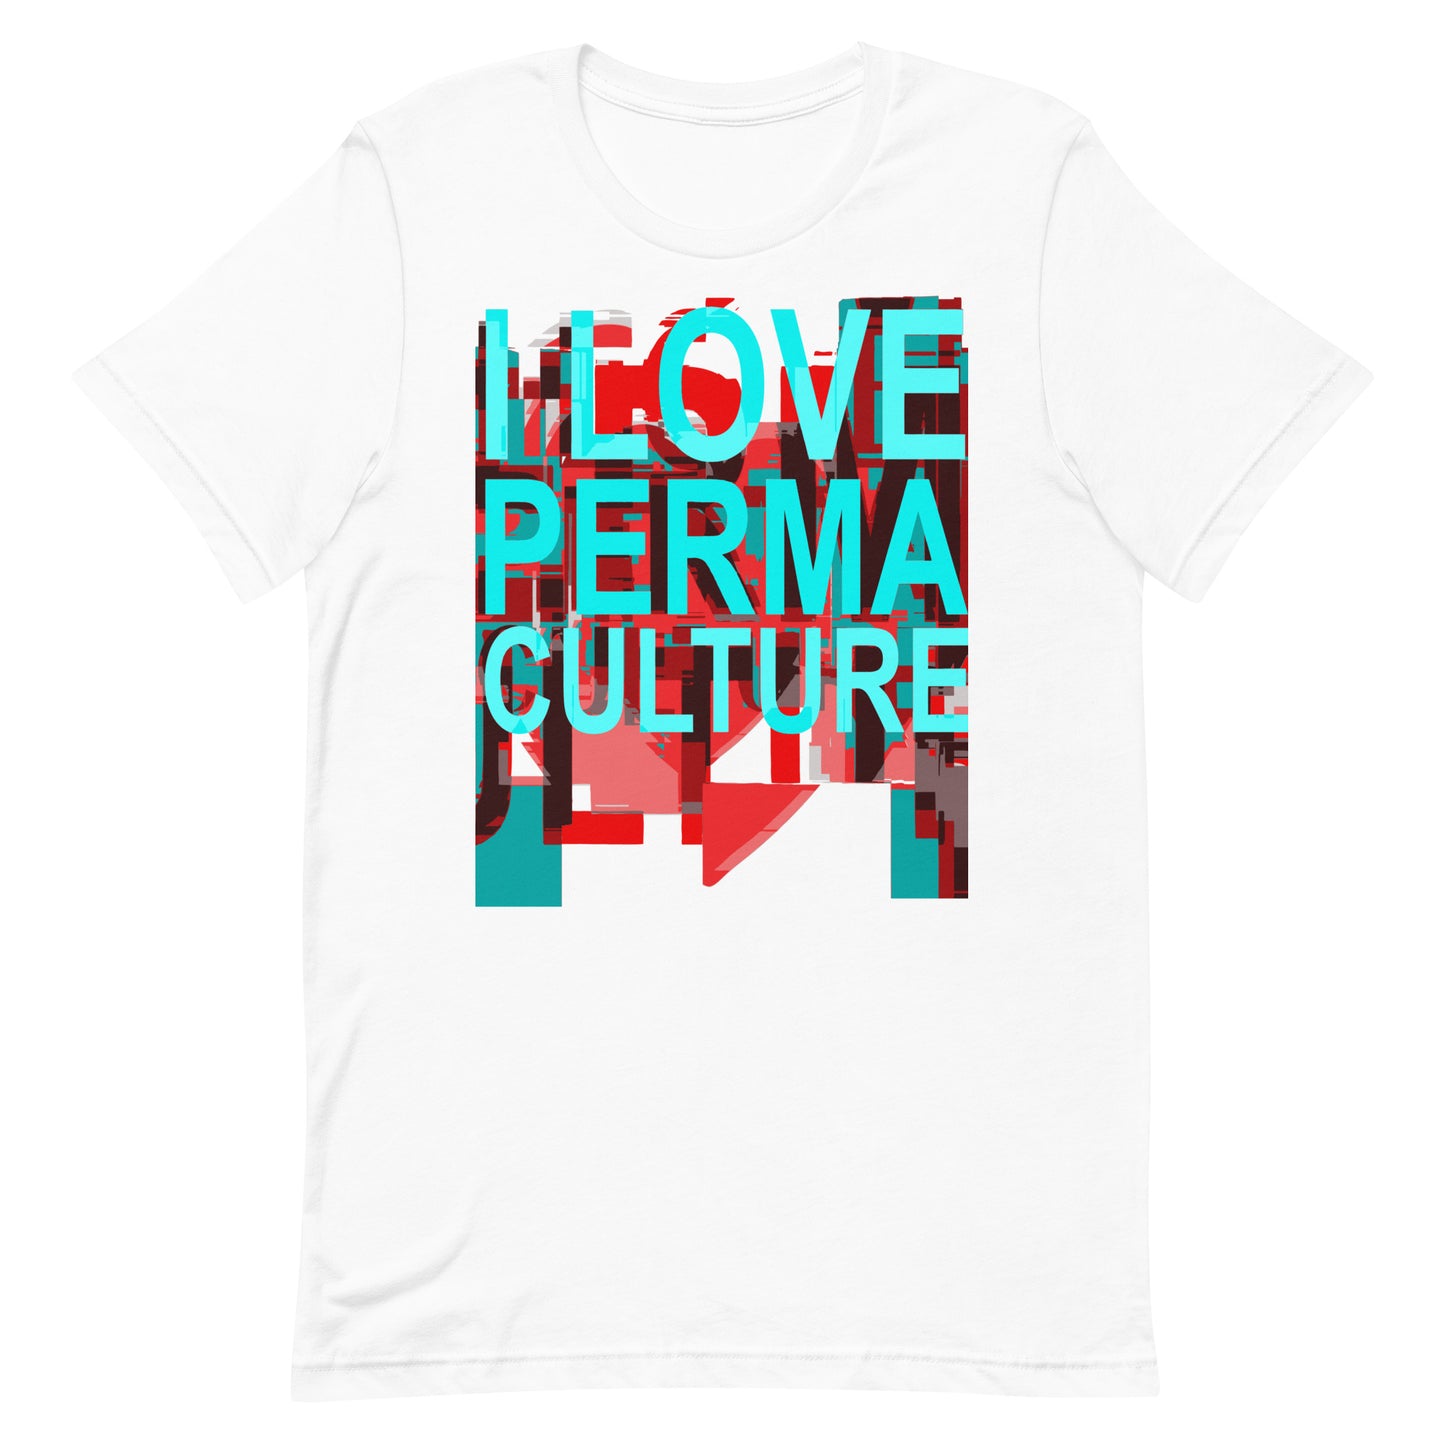 I LOVE PERMACULTURE Unisex t-shirt